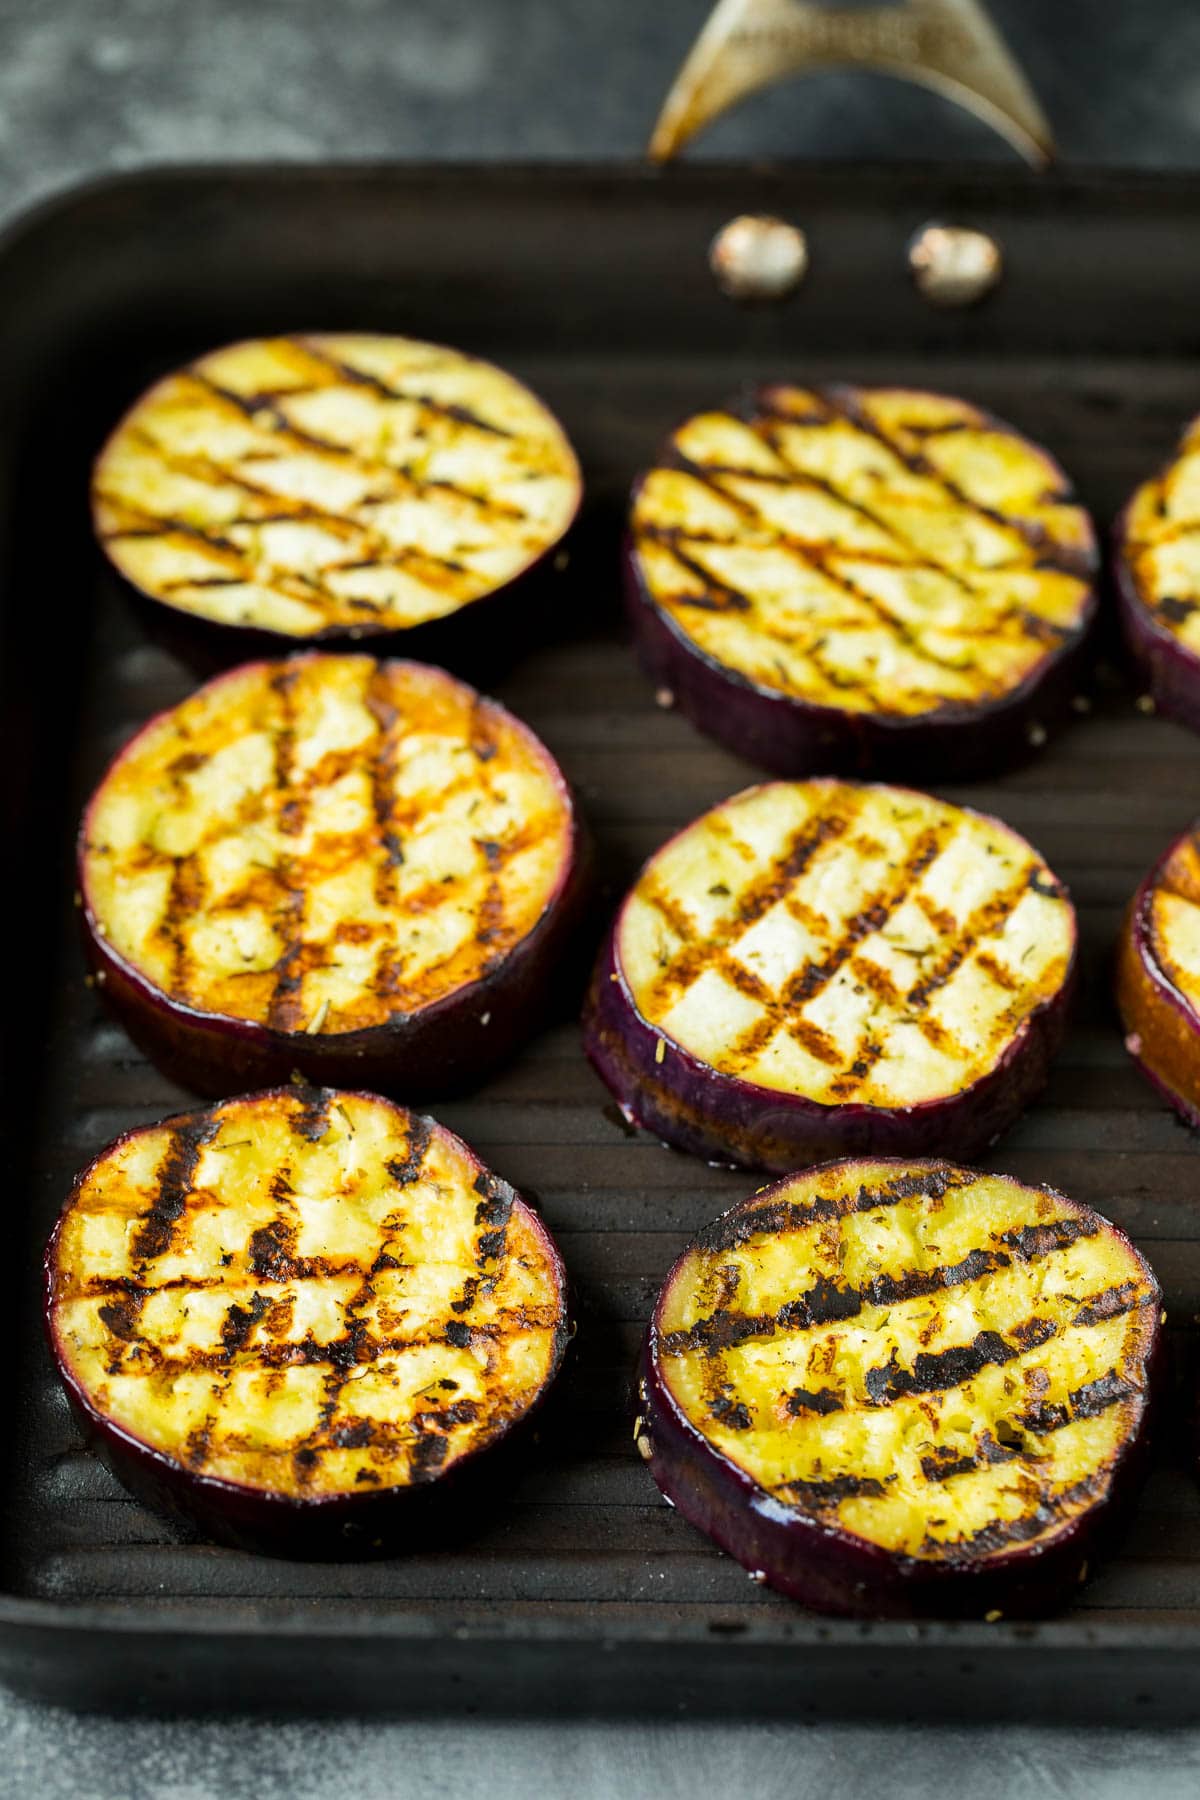 Eggplant slices cooked on a grill pan.